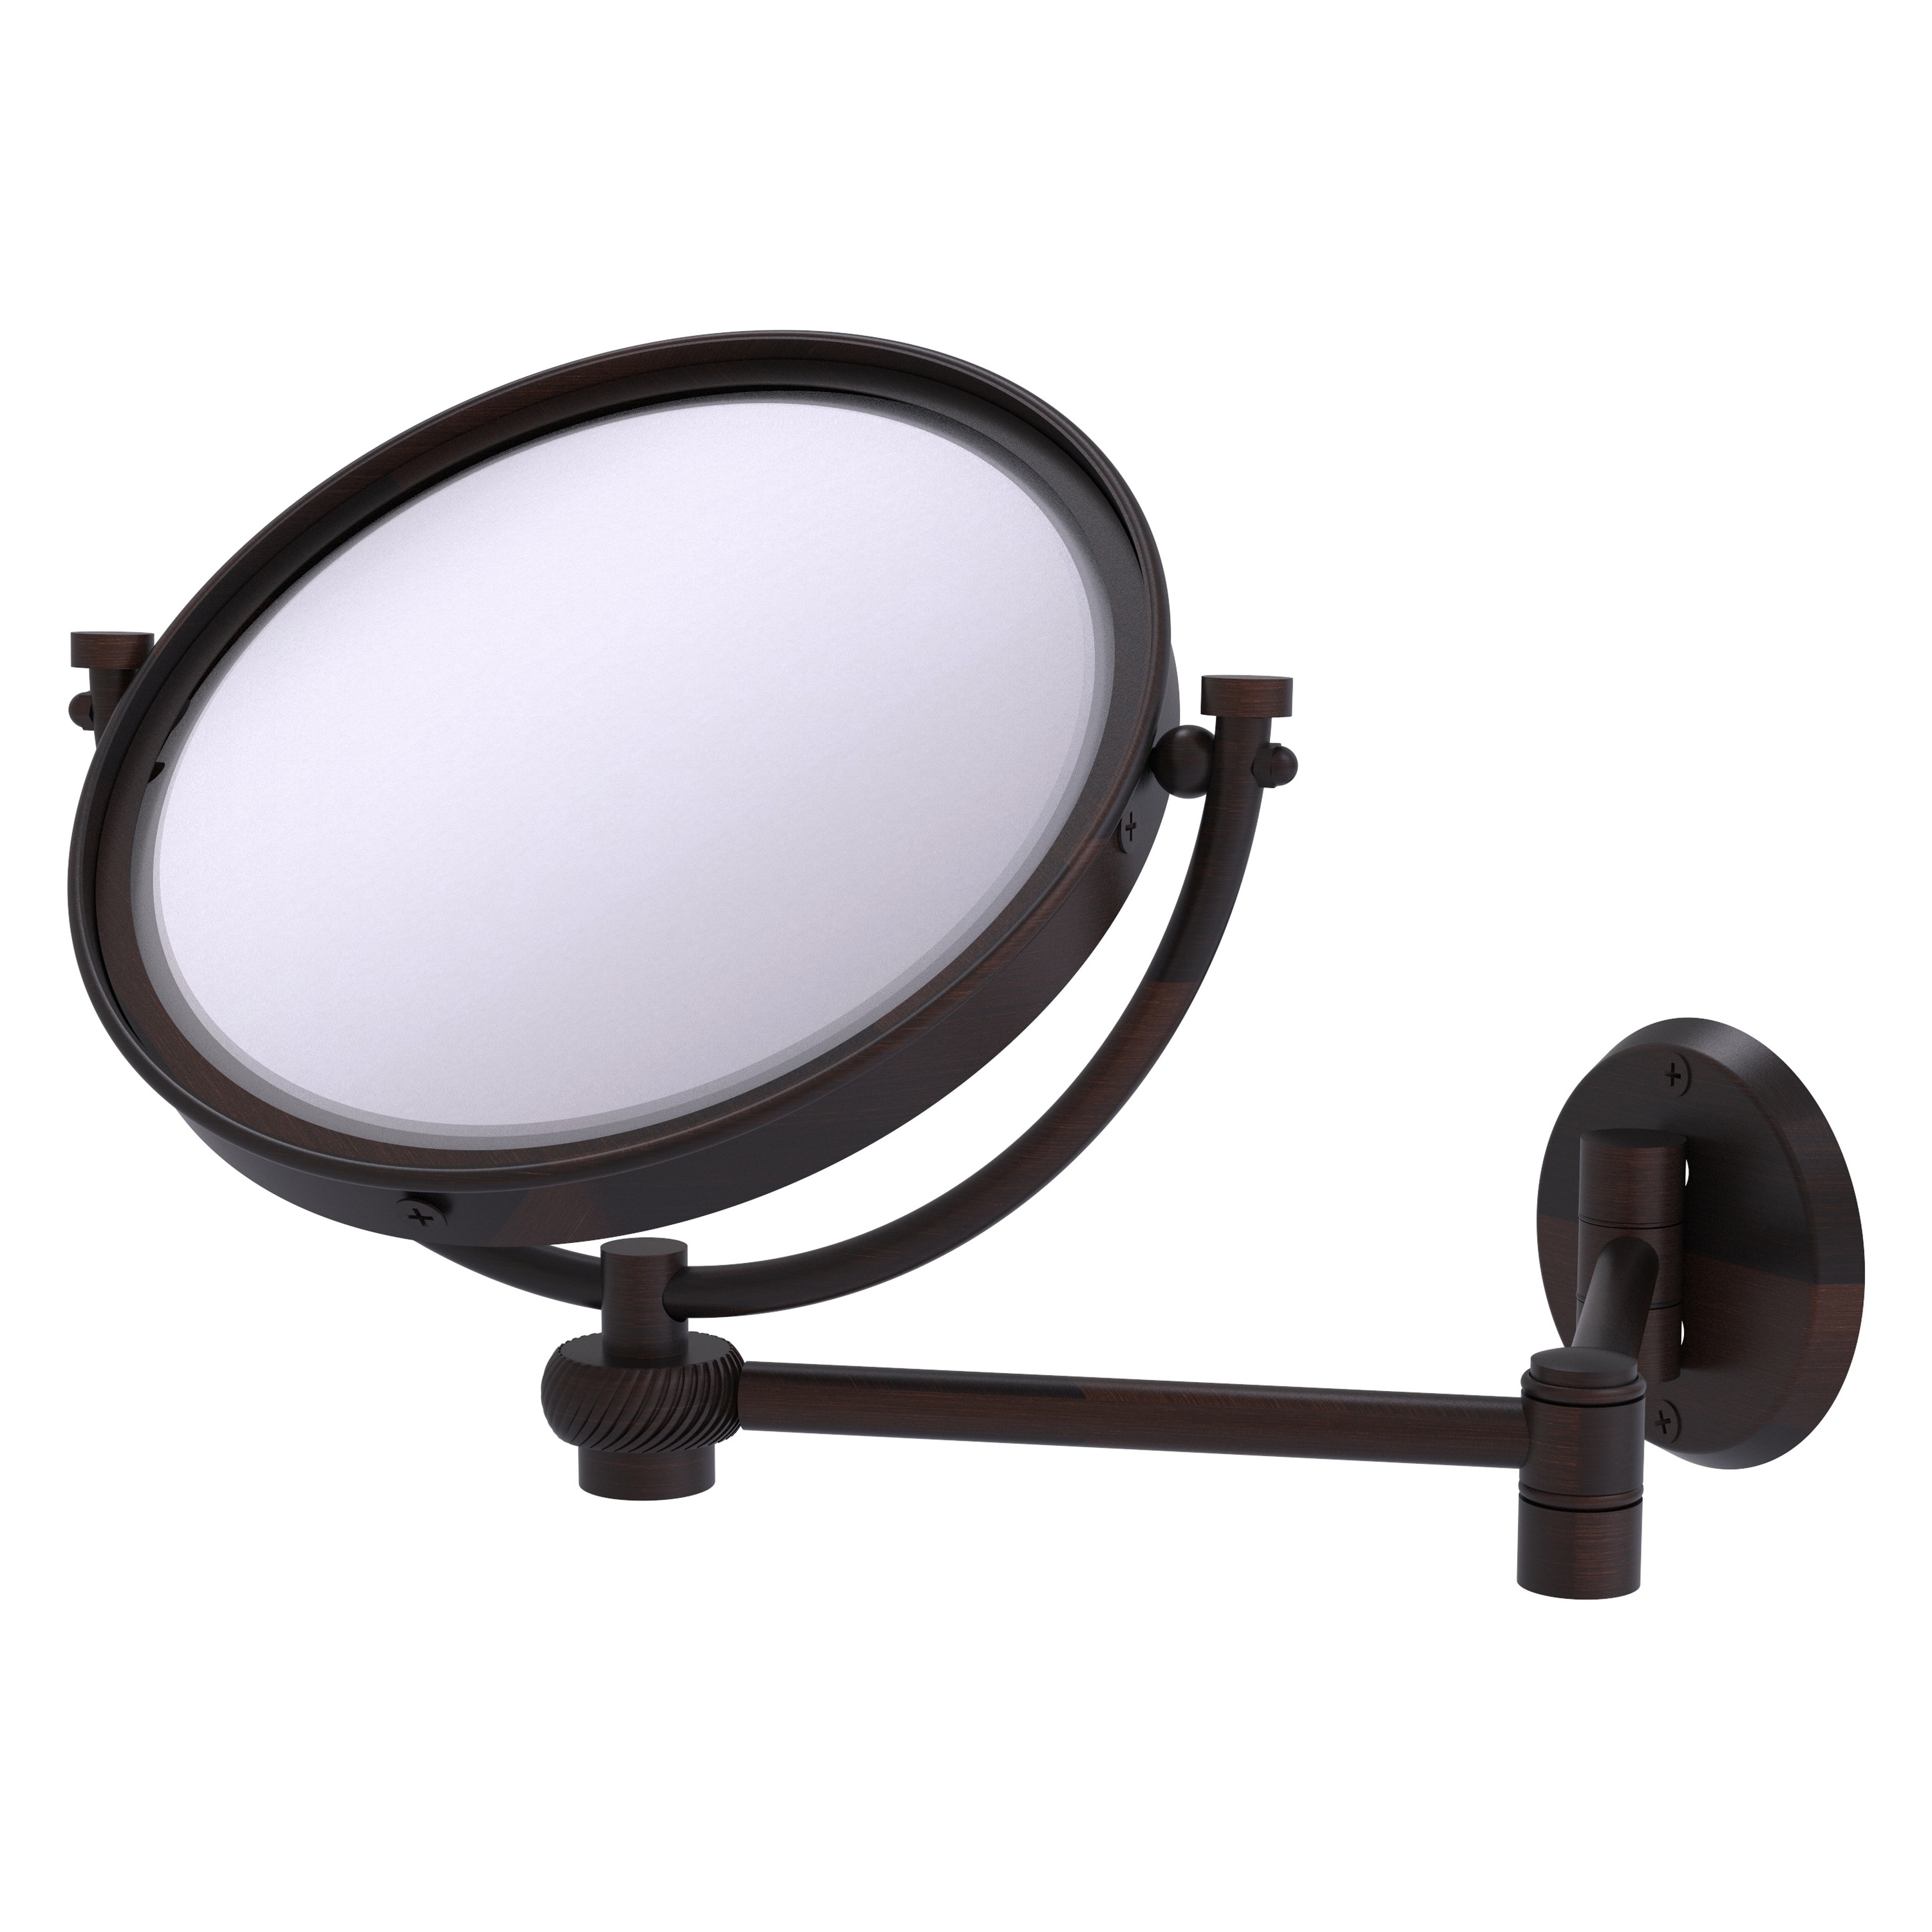 8-in x 10-in Distressed White Double-sided 5X Magnifying Wall-mounted Vanity Mirror | - Allied Brass WM-6T/5X-VB